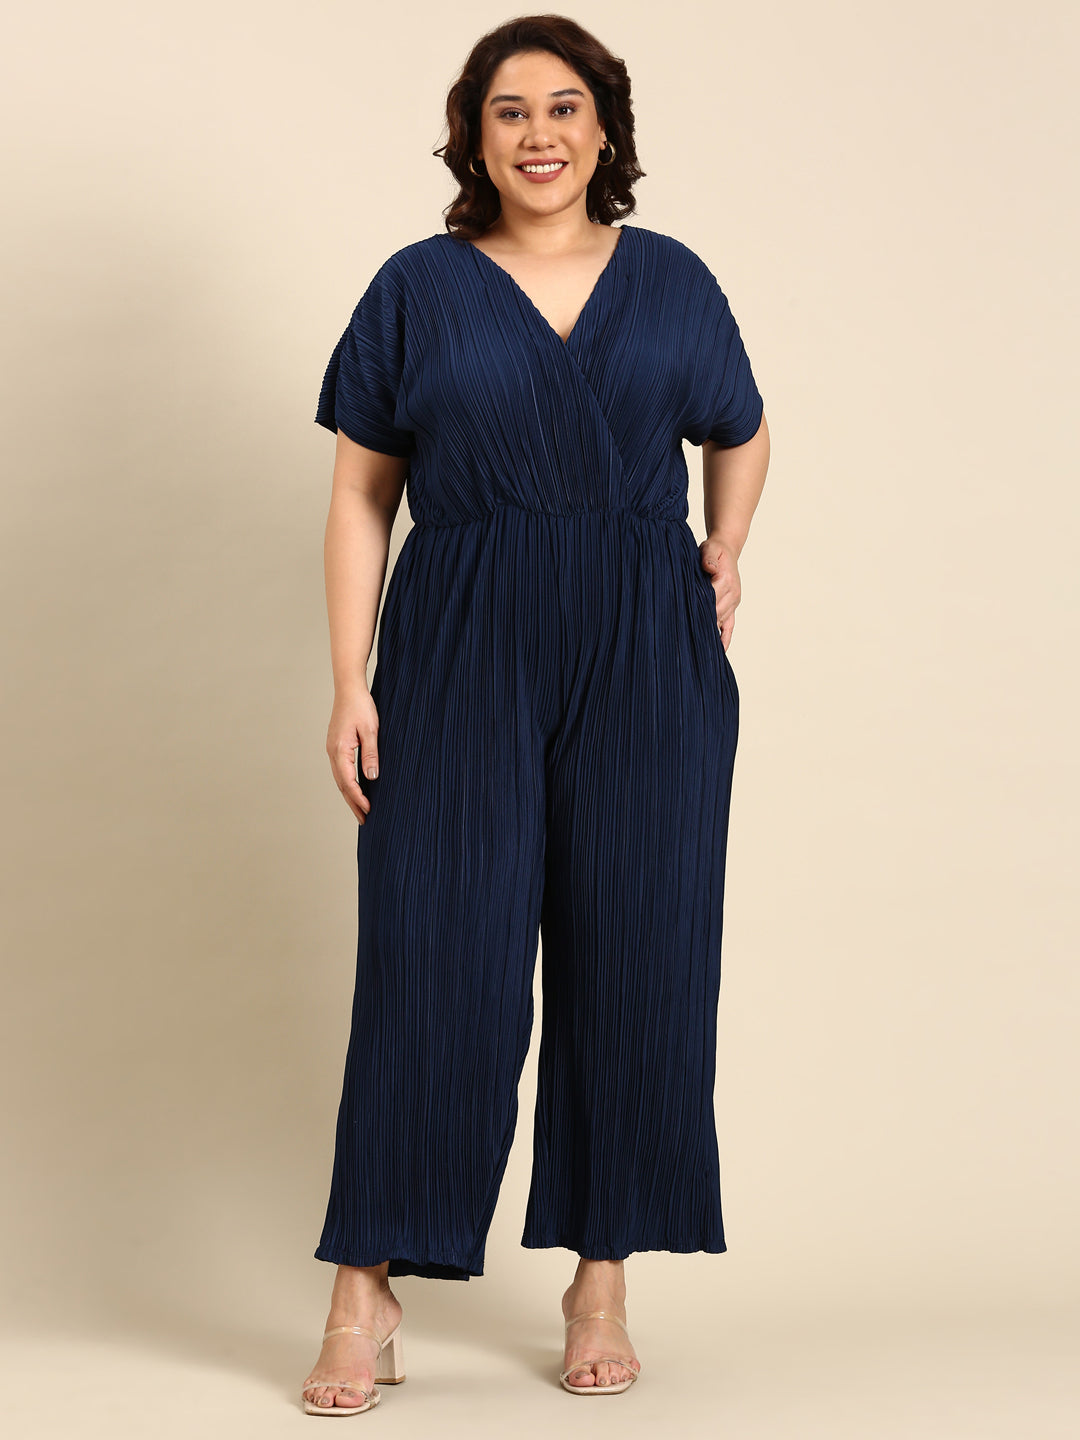 Plus-Size Jumpsuits - Comfy Rompers for Curvy Women Online – The Pink Moon